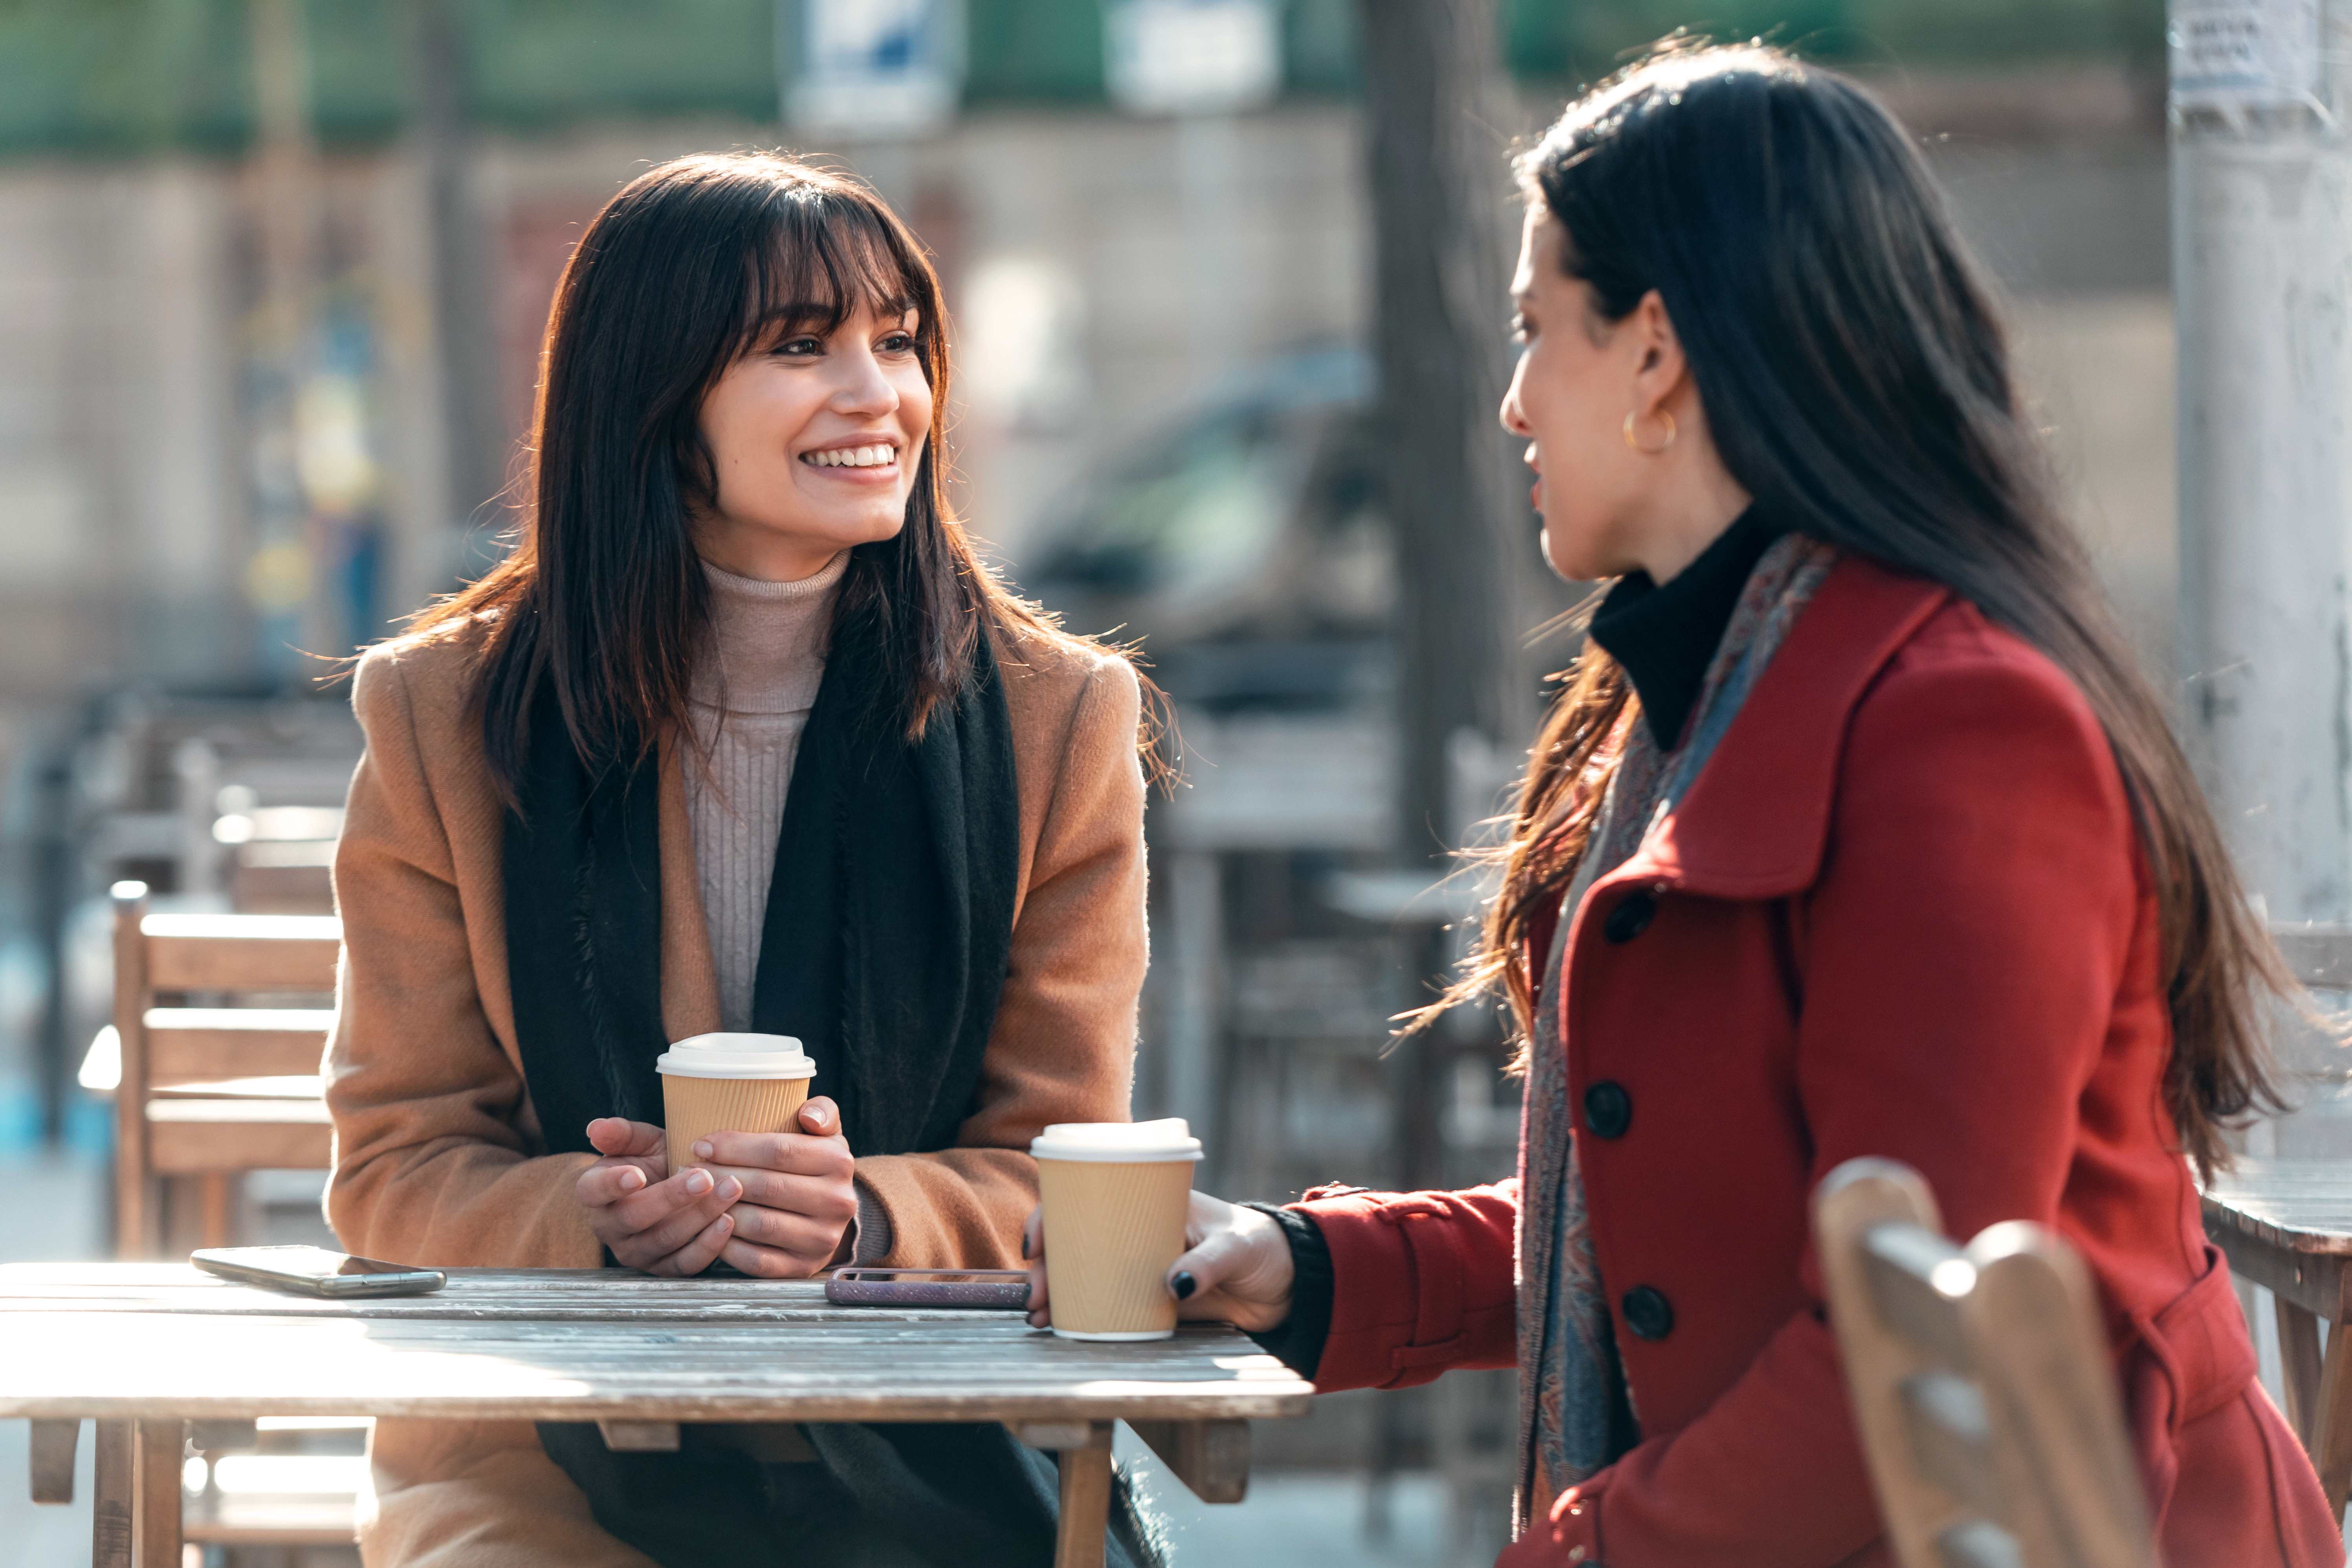 A pair of friends meet for coffee to de-stress from their busy schedules.